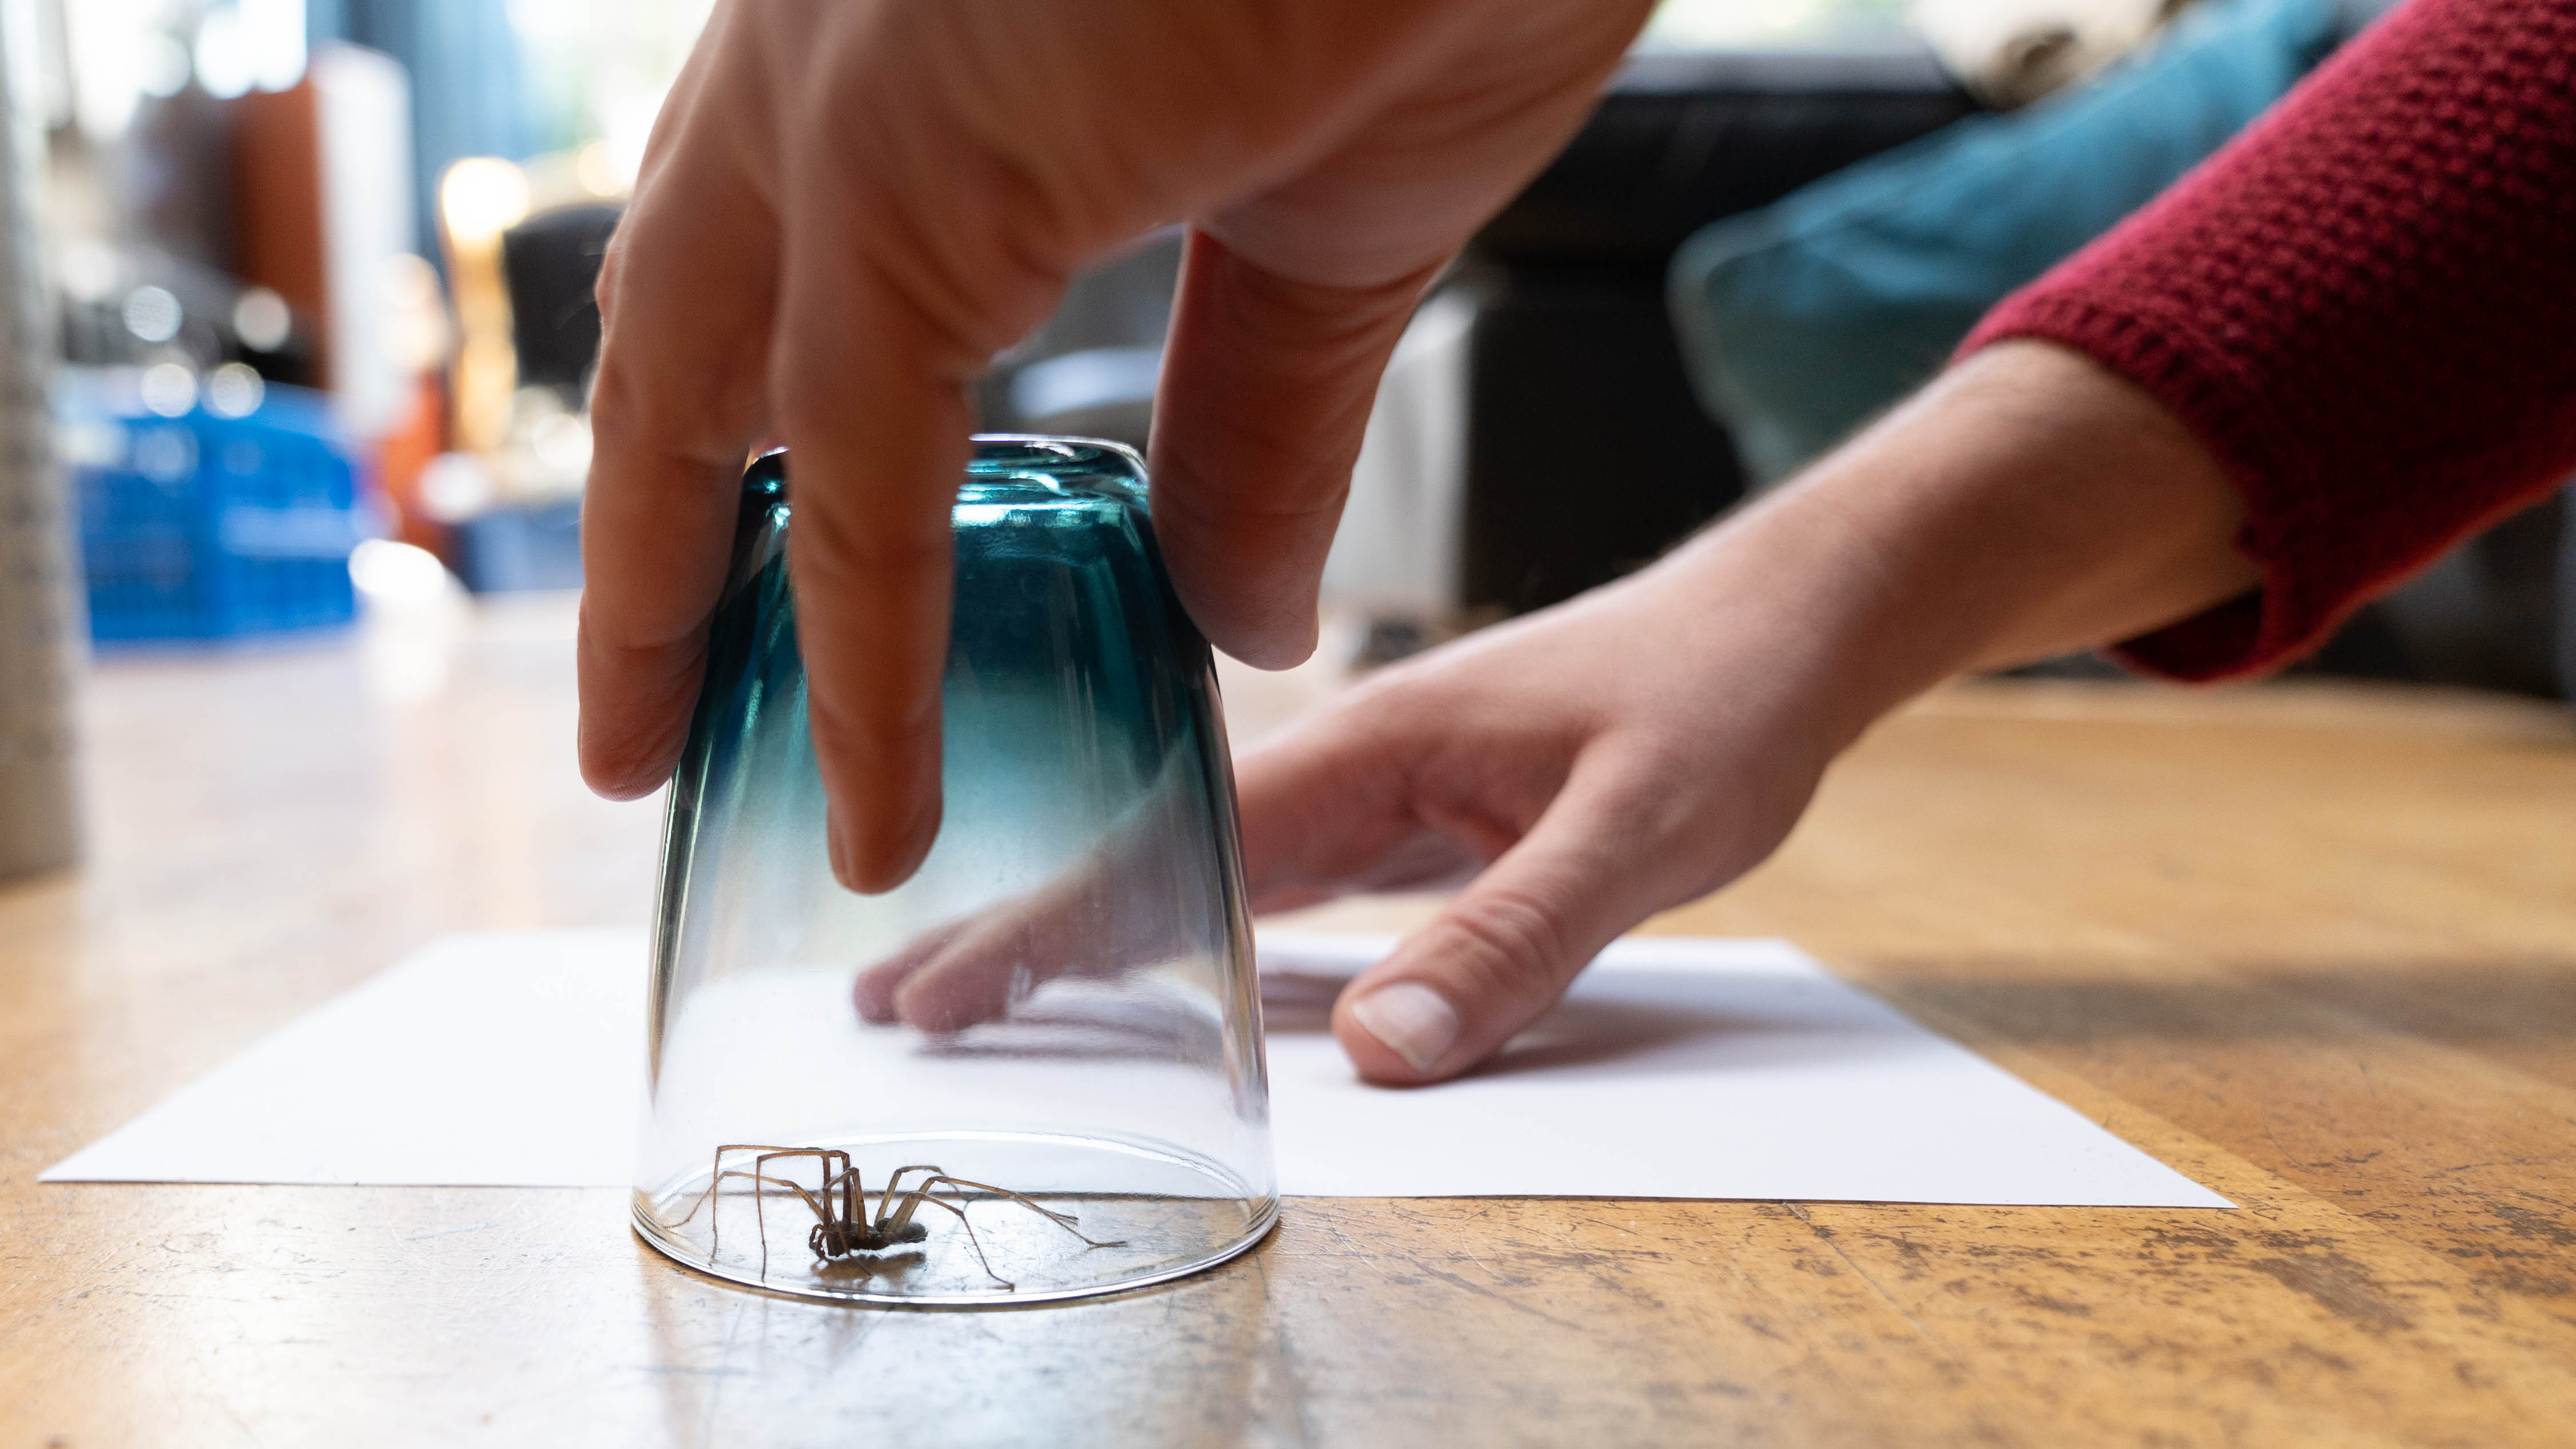 A spider trapped under a glass with a piece of paper to slide under